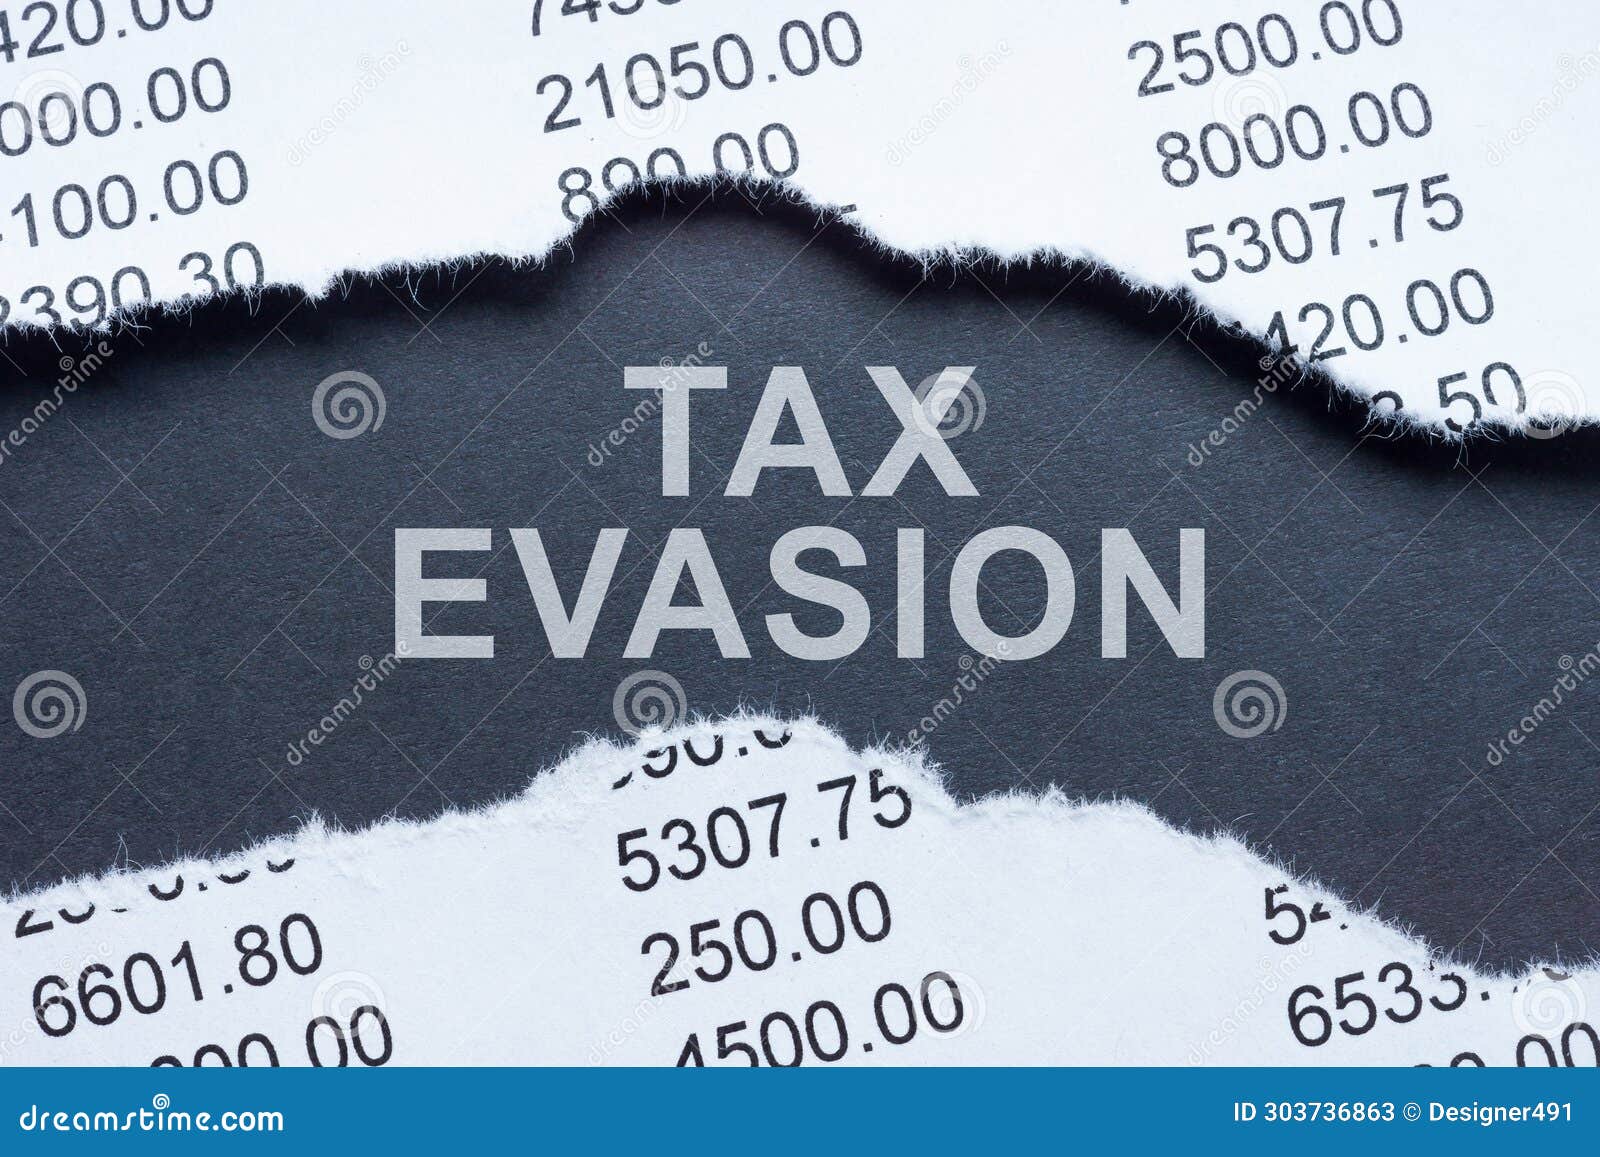 inscription tax evasion and torn financial report.